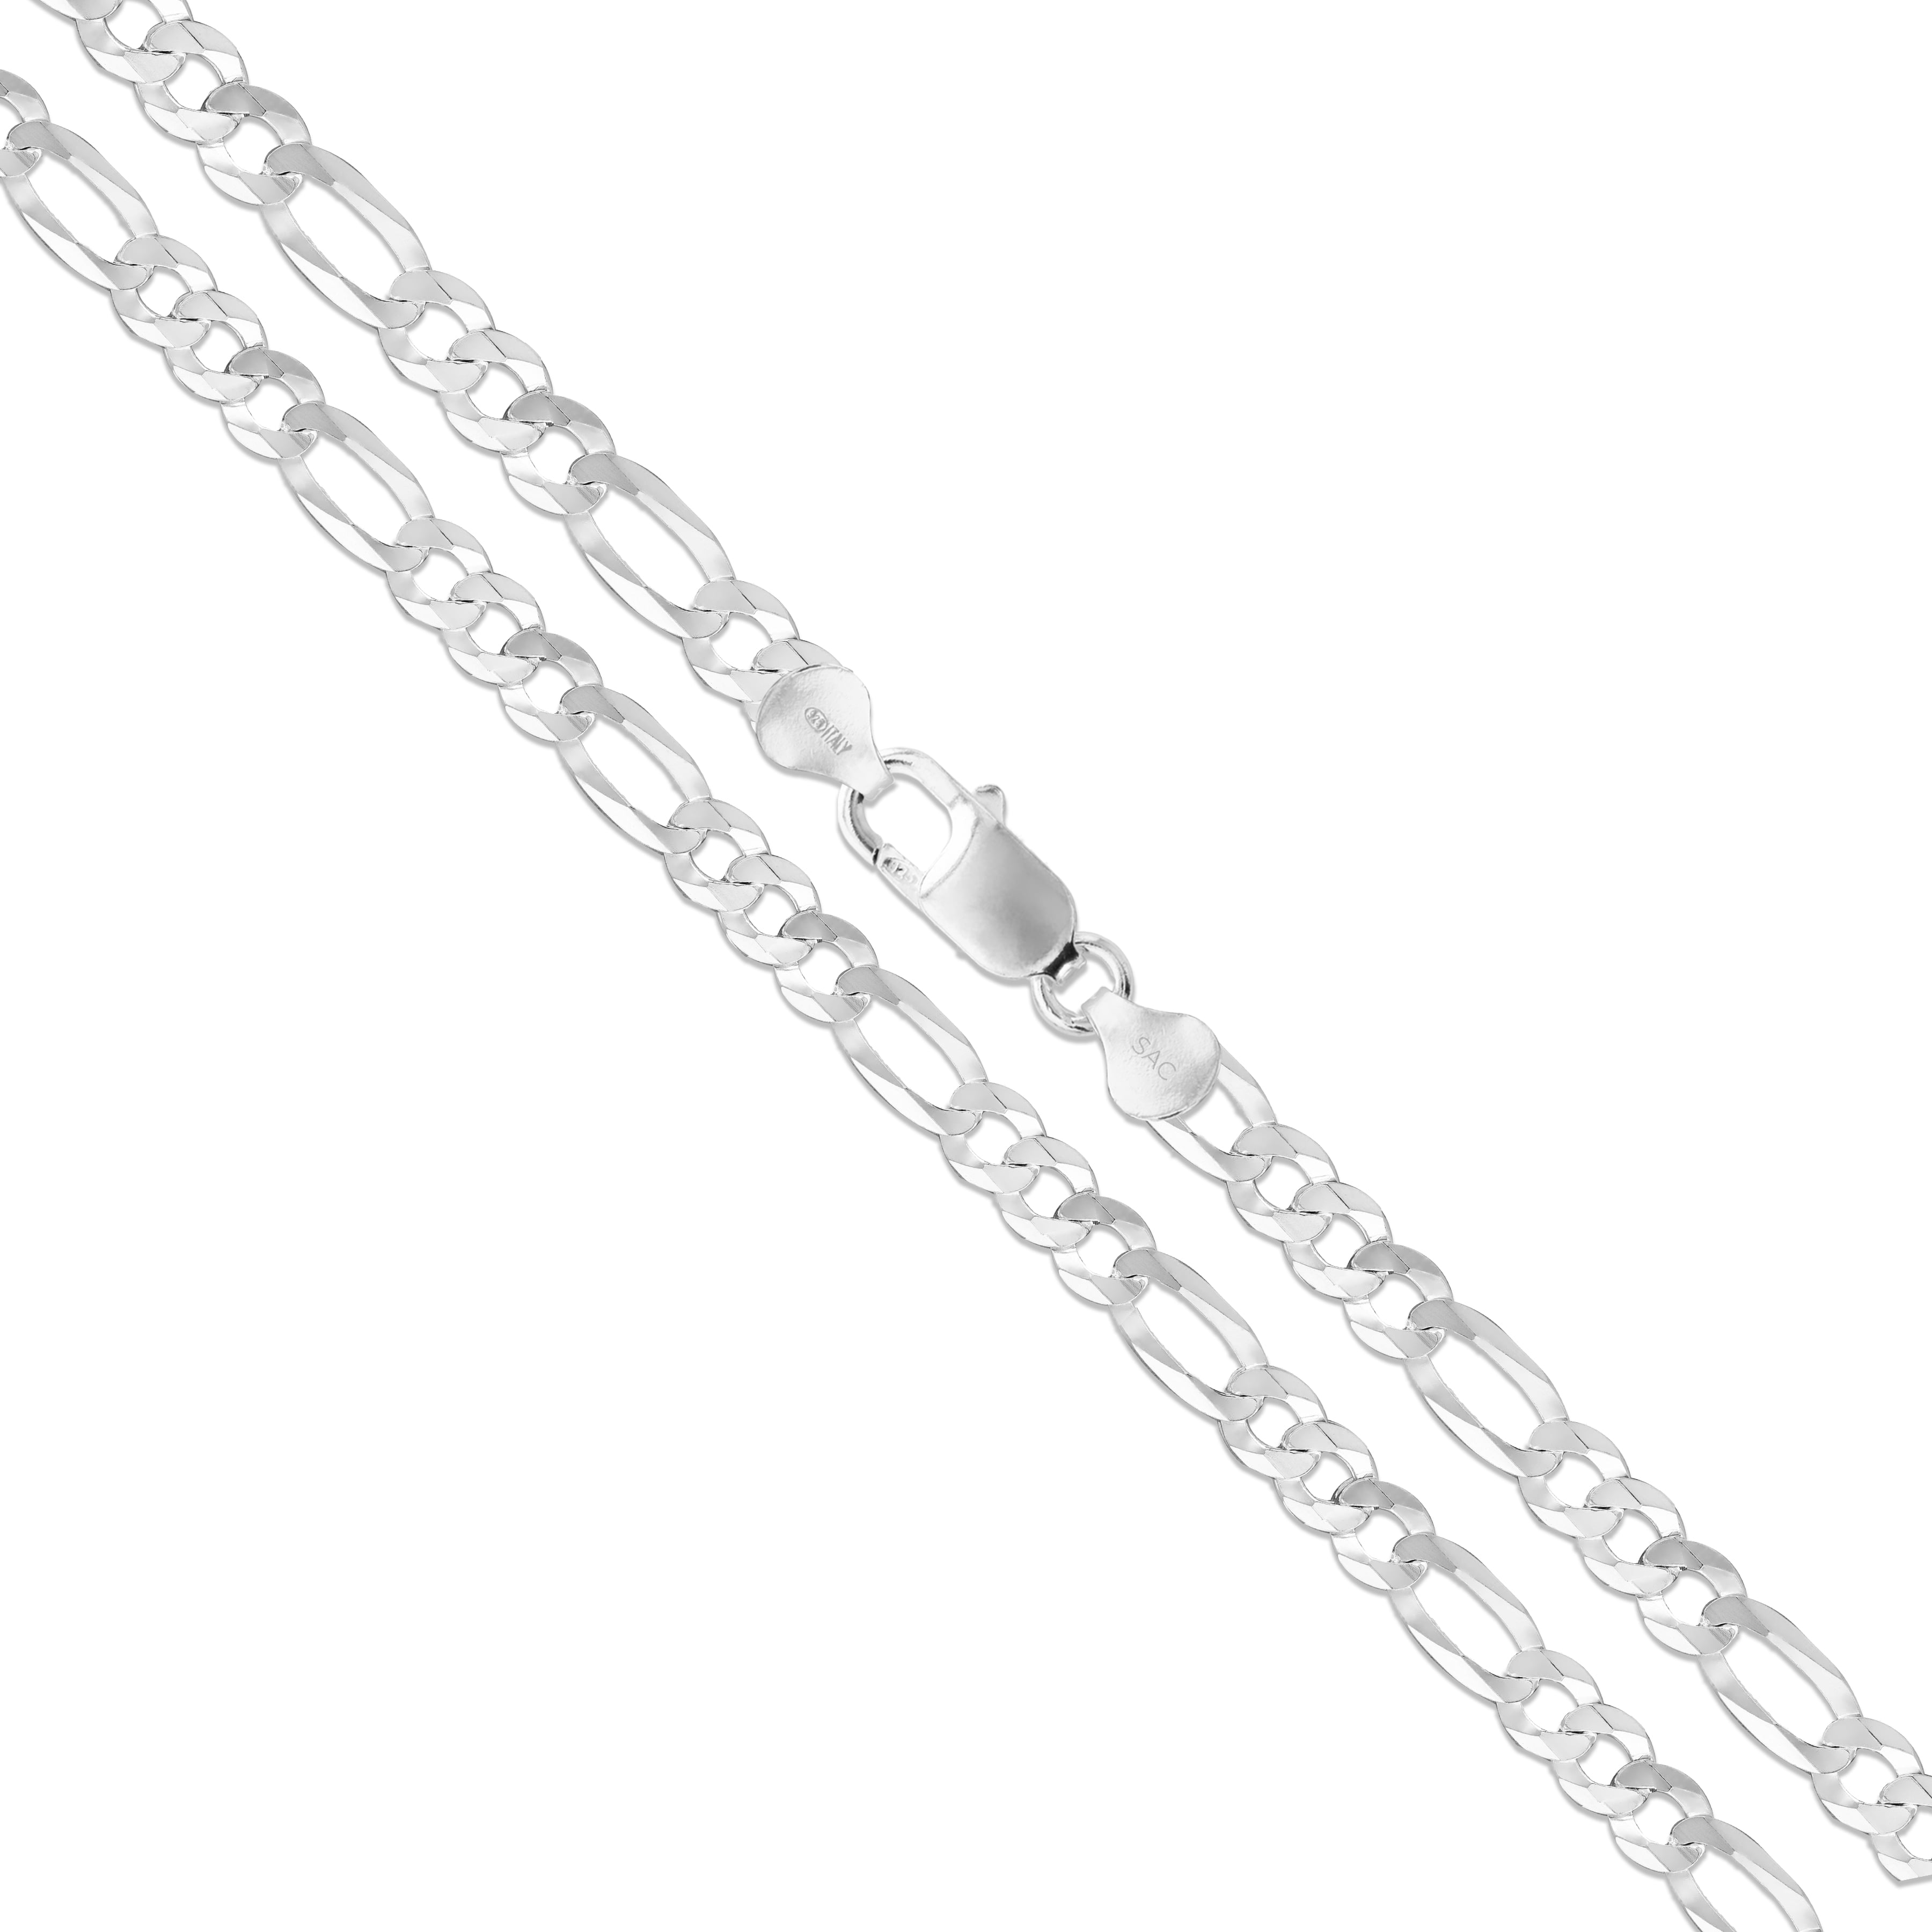 Details about  / 24/" 60cm STERLING SILVER 925 5mm FIGARO CHAIN NECKLACE Real Italian Solid Silver